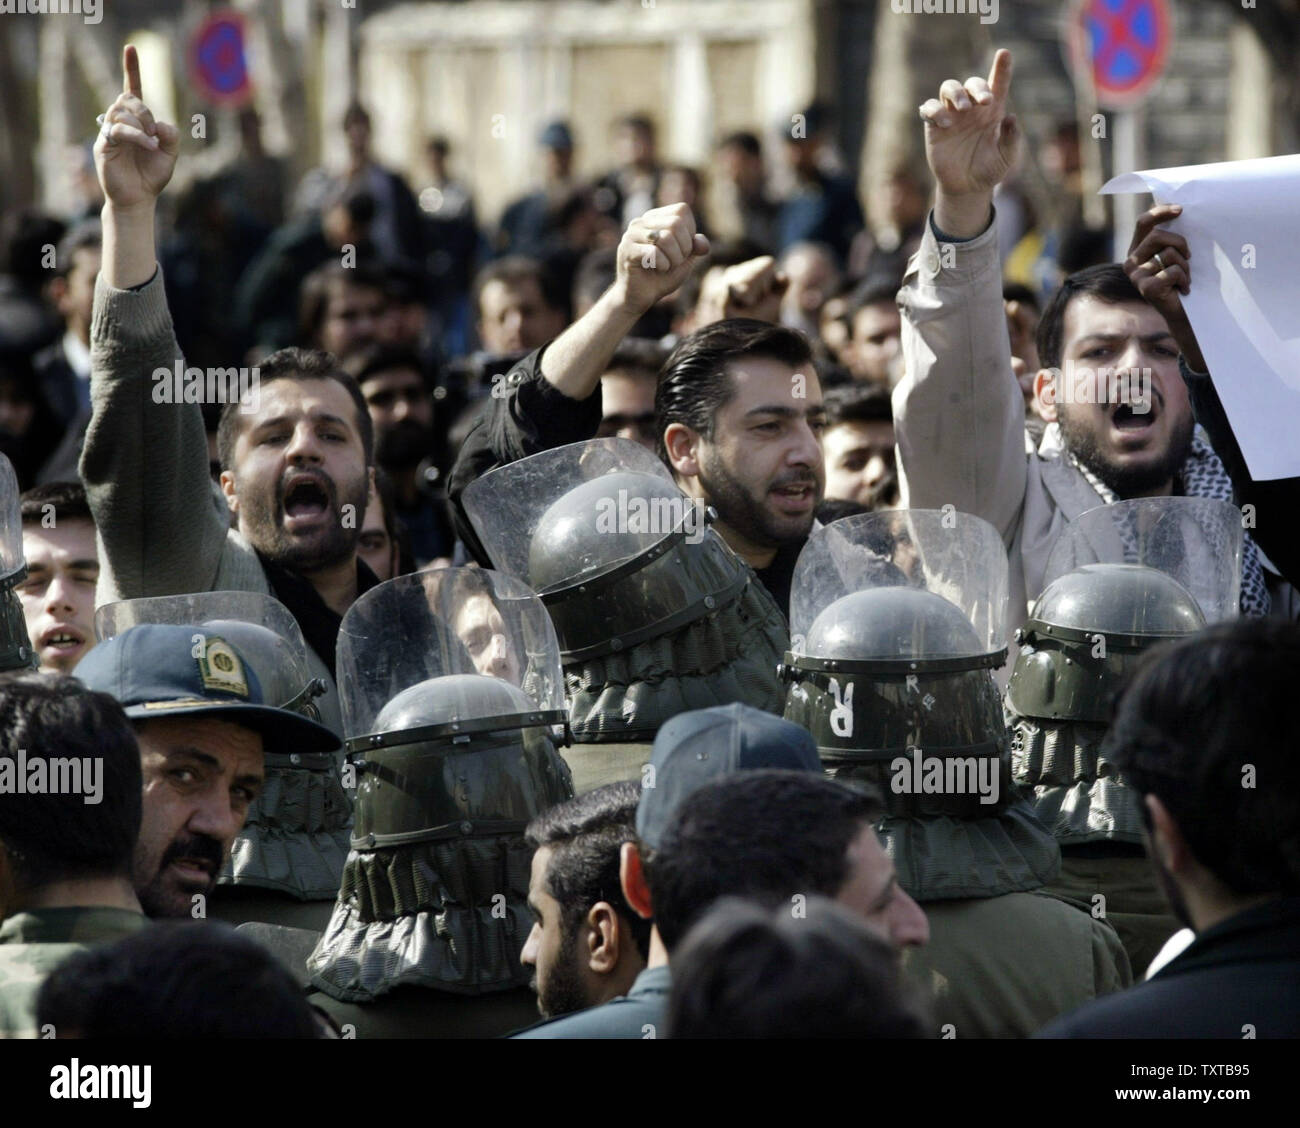 Iranian students chant anti-French slogans during a demonstration in front of the French Embassy to support Iran's nuclear program and to protest a Danish newspaper cartoon that is perceived as an insult to the Prophet Mohammed in Tehran, Iran, February 12, 2006.  (UPI Photo/Mohammad Kheirkhah) Stock Photo